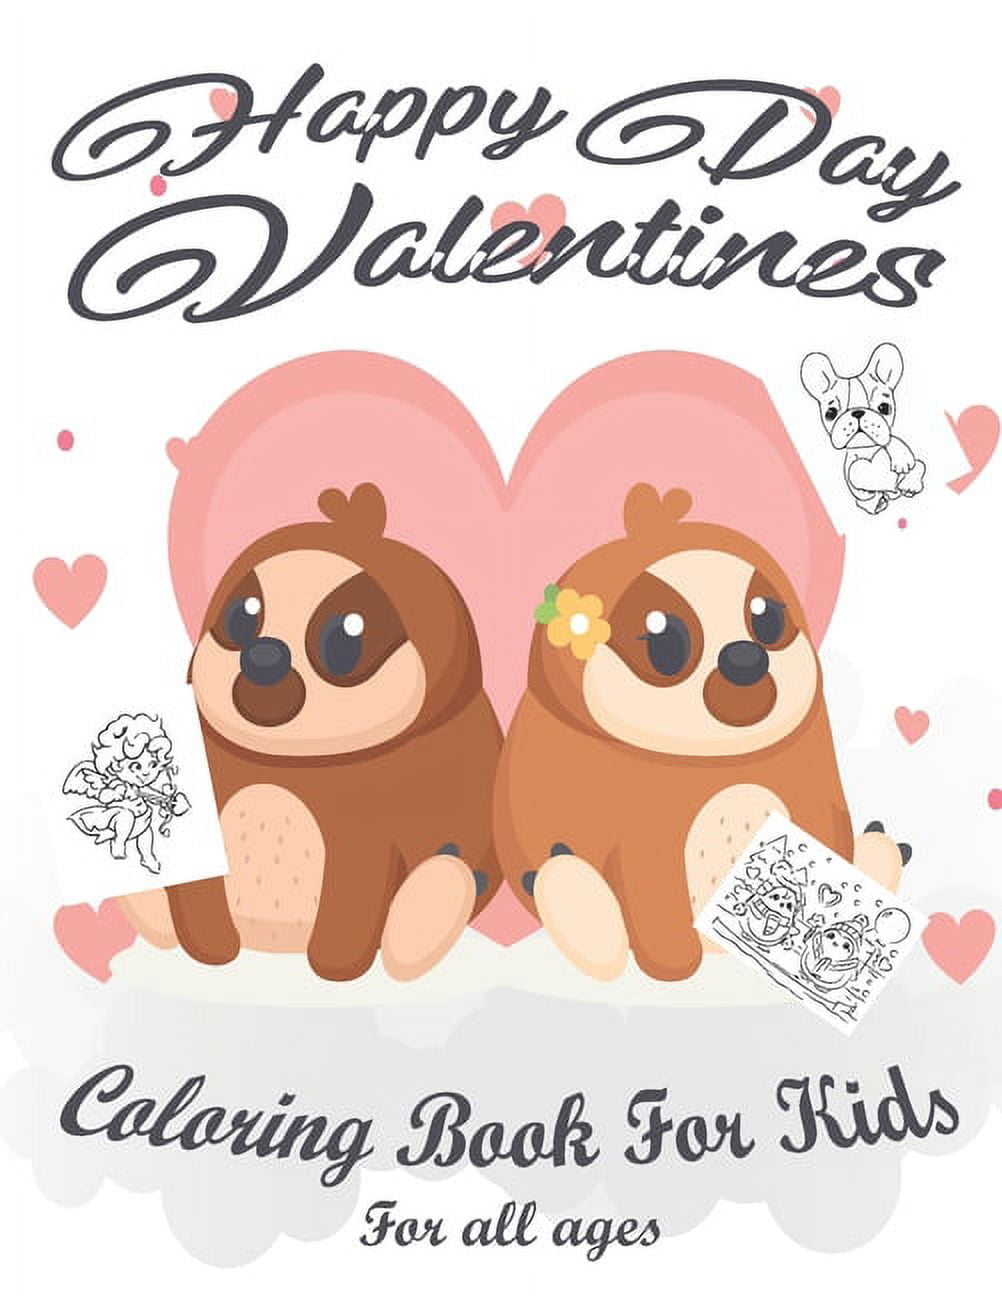 Valentine's Day Coloring Book for Kids: A Fun and Easy Happy Valentines Day Coloring Pages With Flowers, Sweets, Cherubs, Cute Animals and More for Kids, Toddlers and Preschool [Book]